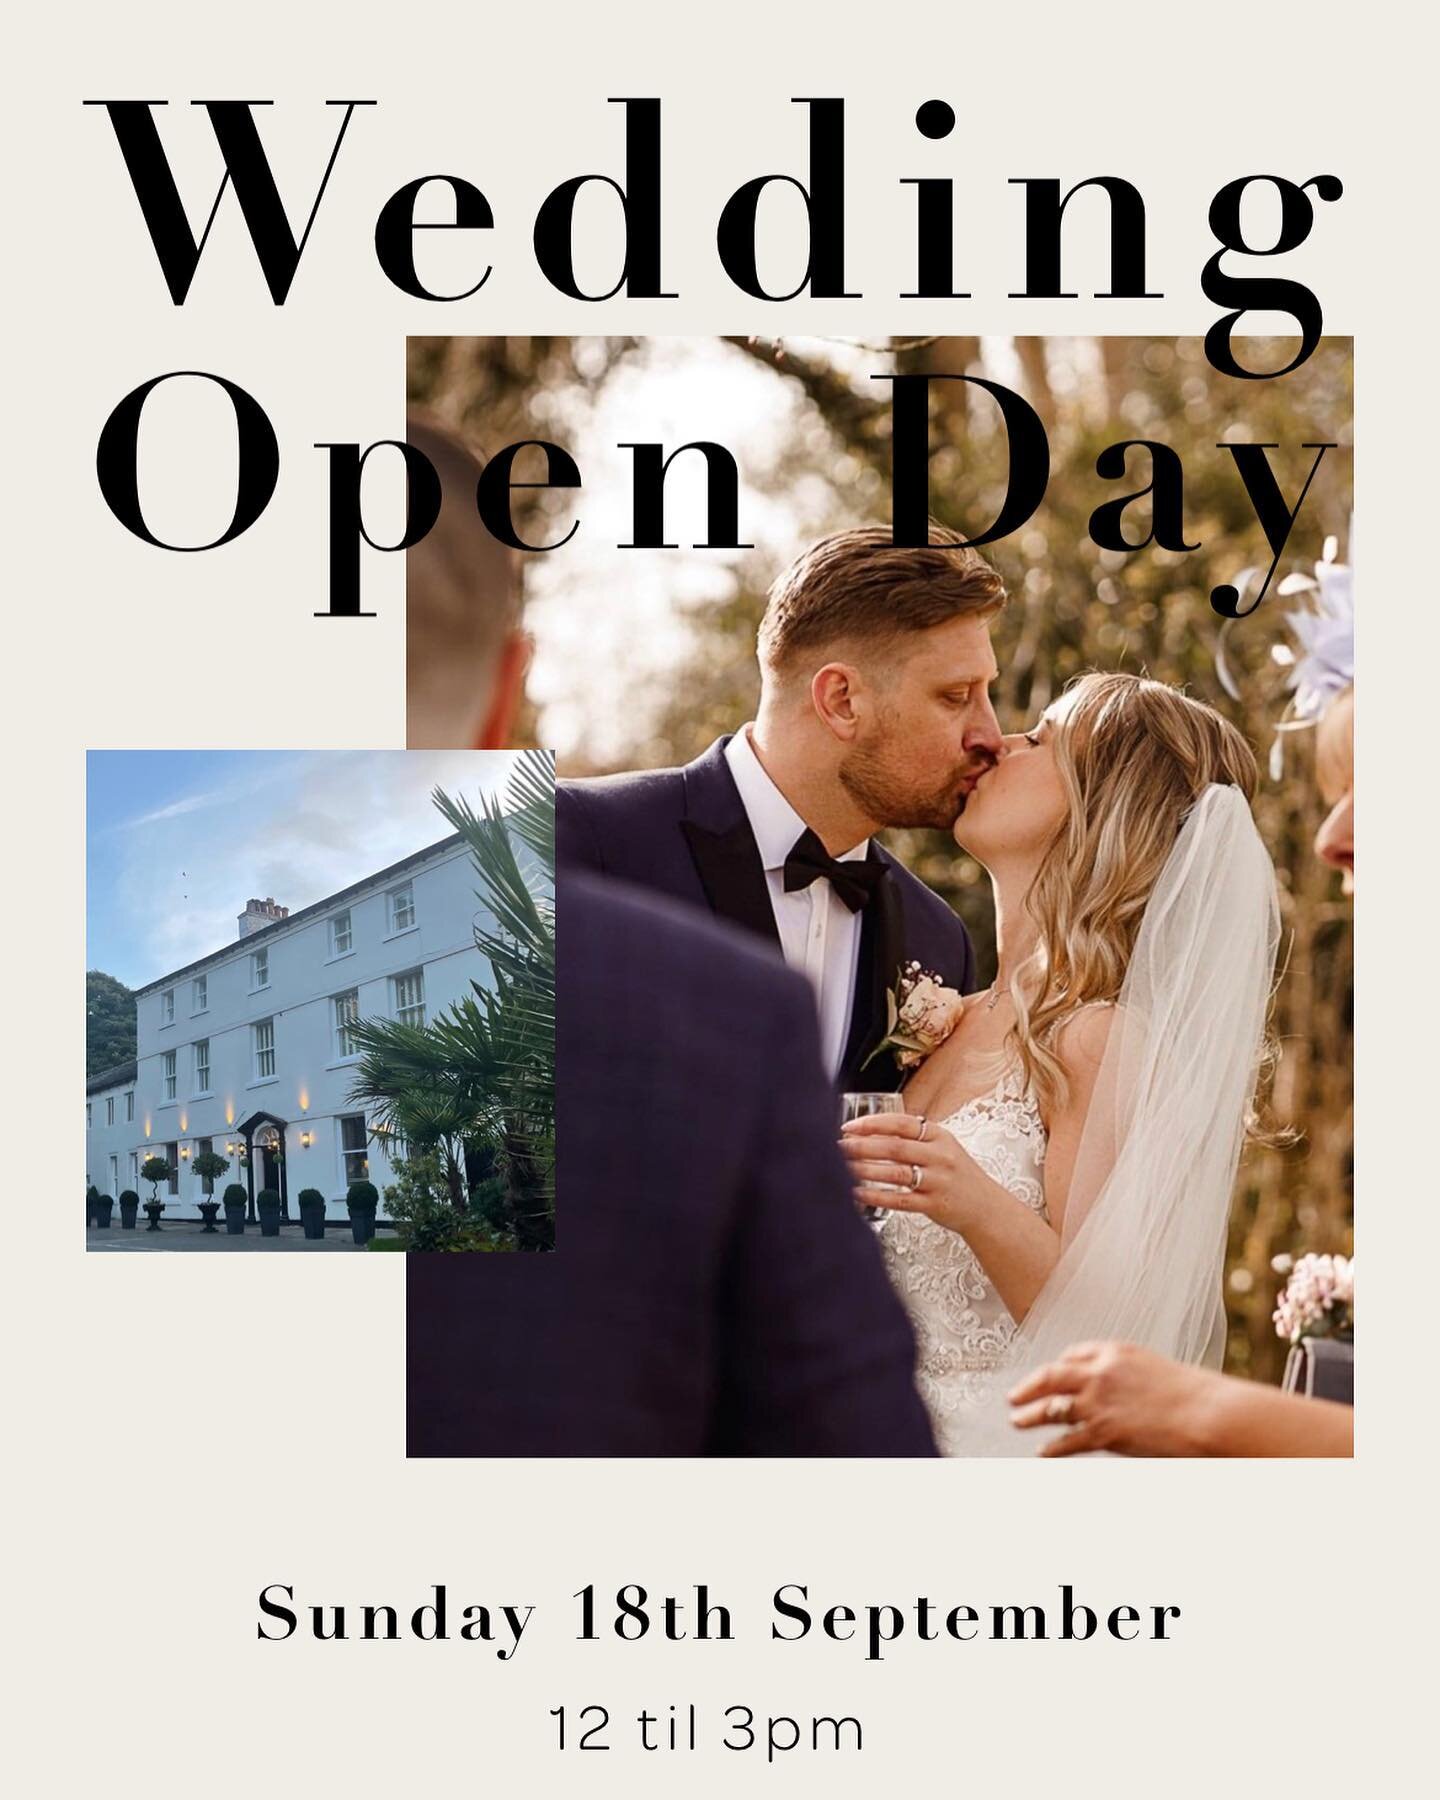 Not long till our Wedding Open Day now! 

Can&rsquo;t wait to be surrounded with our favourite suppliers with a glass of fizz in hand! 

Here&rsquo;s the fabulous line up&hellip; 
@hedgehogflorist 
@willow_and_fig_events 
@mattgraingerphoto 
@bridal_